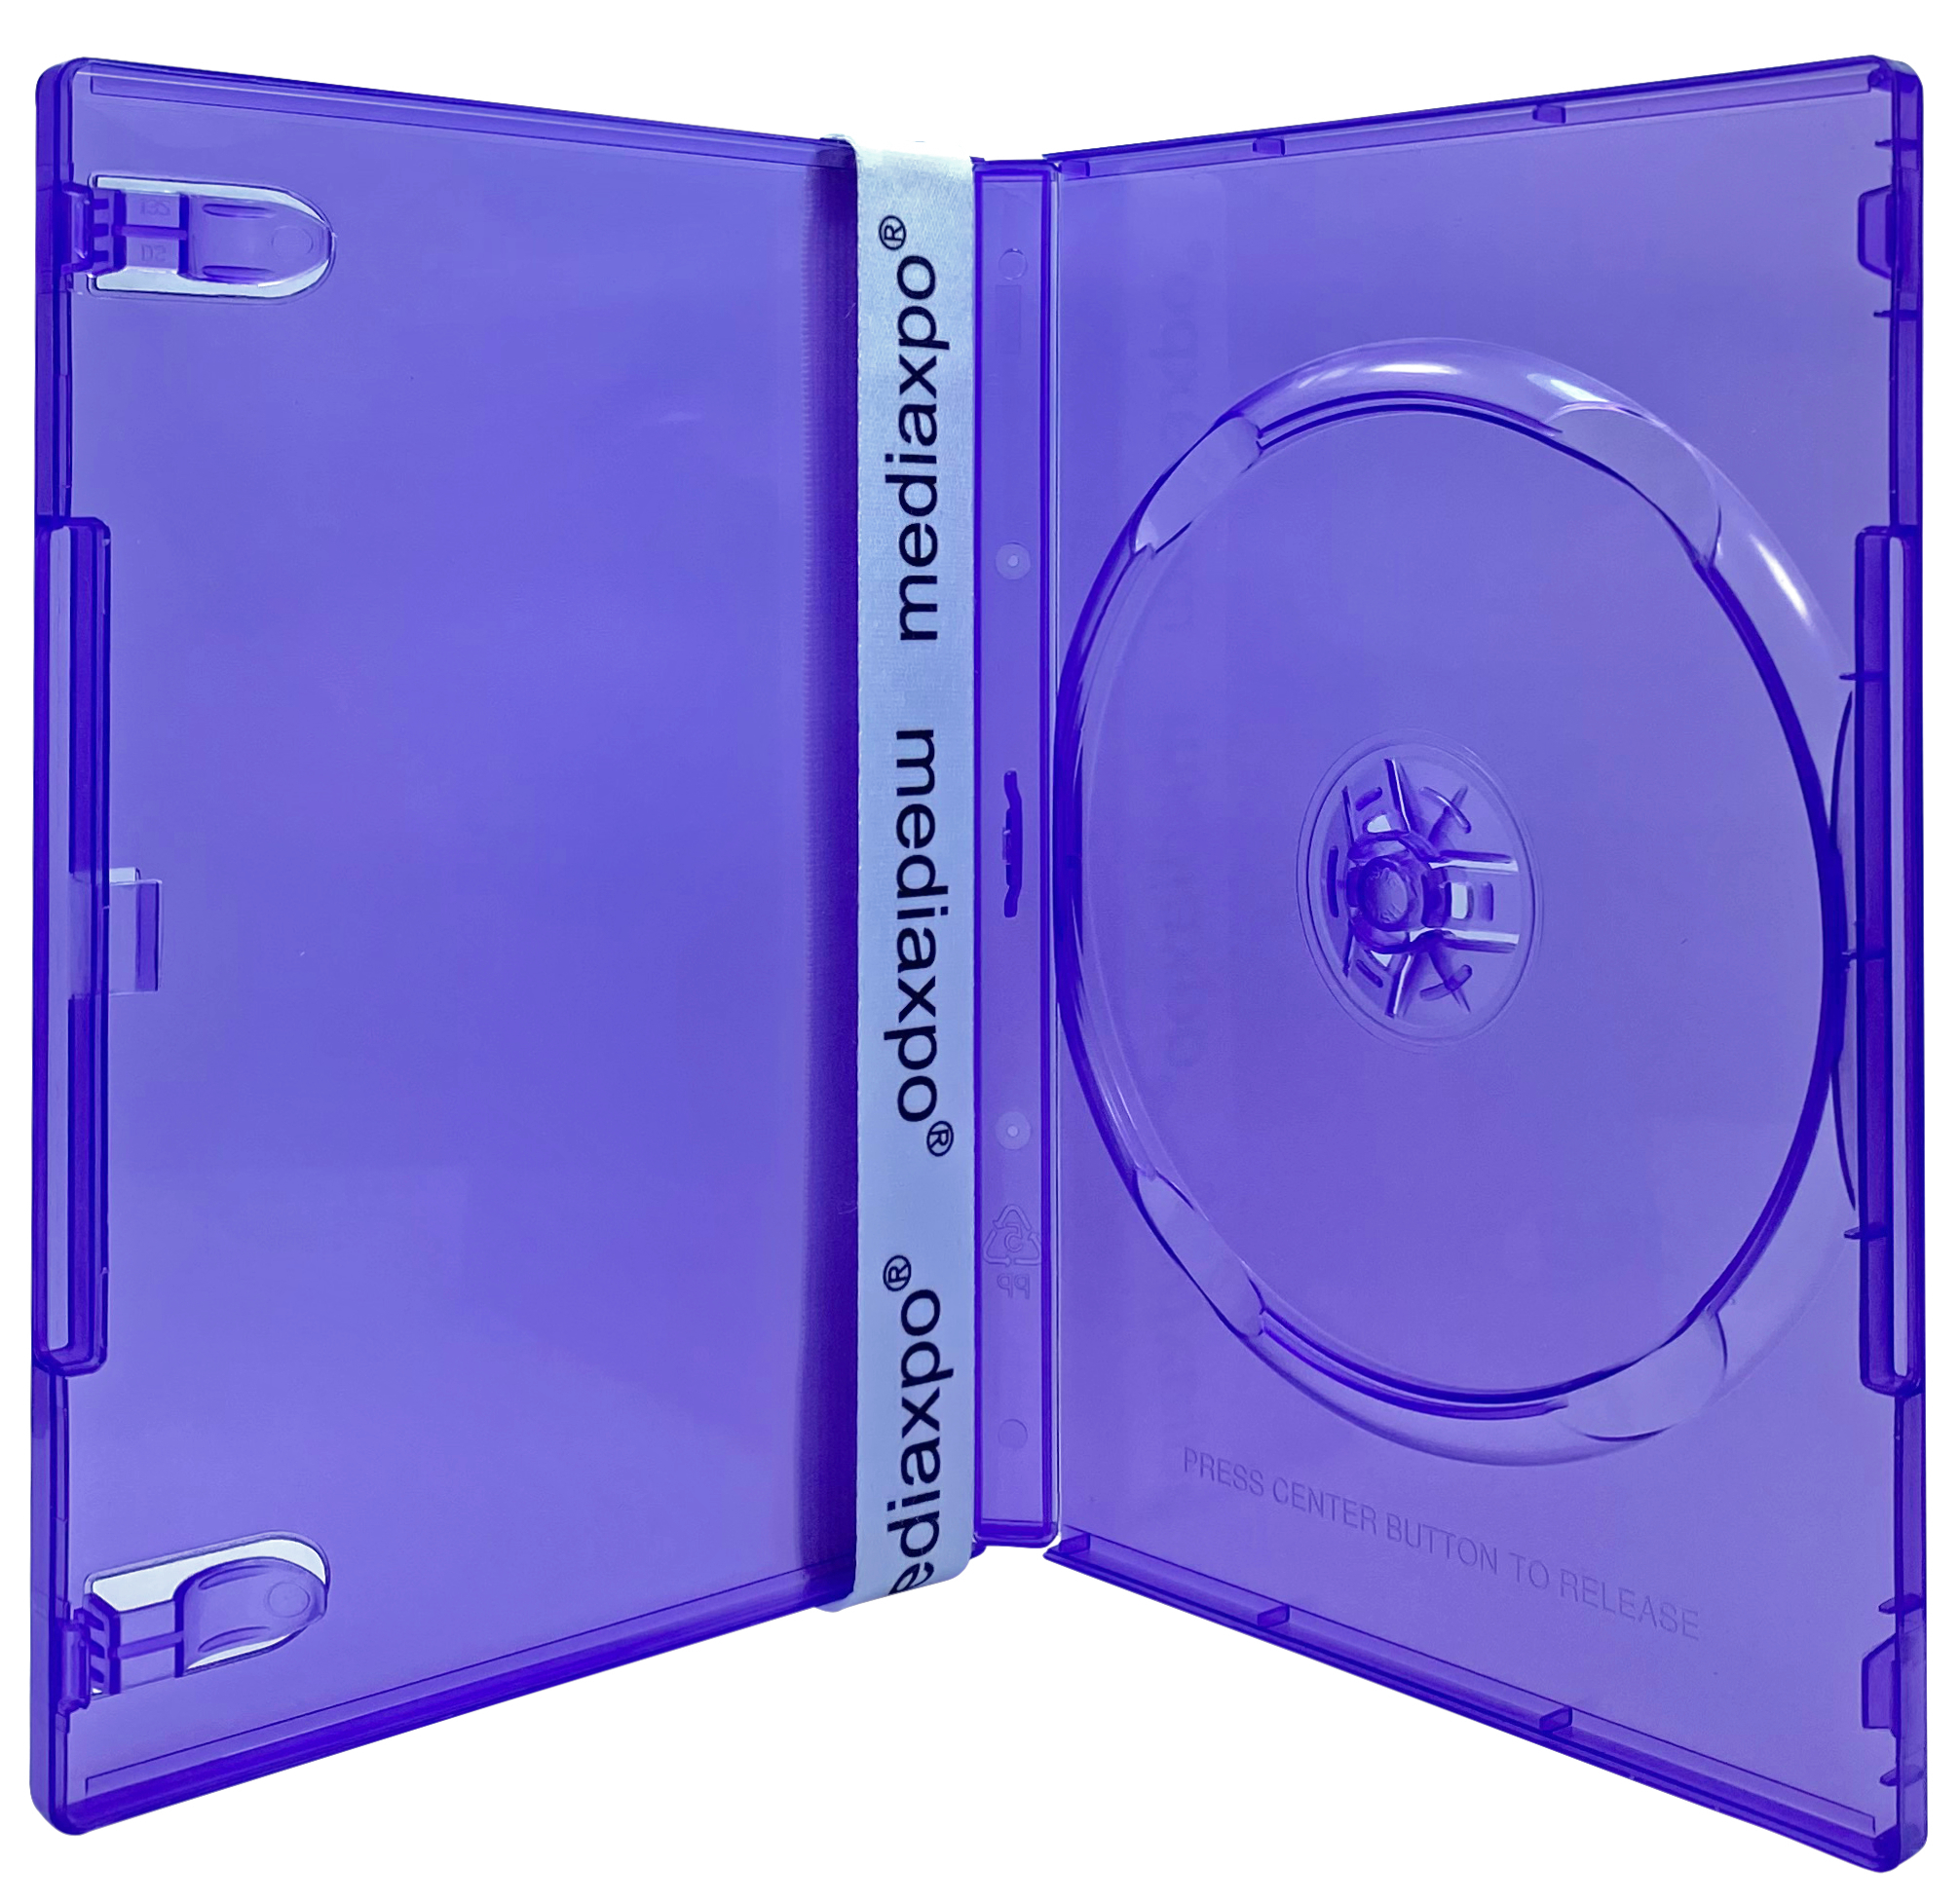 Image of ID 1214260145 200 STANDARD Clear Purple Color Single DVD Cases